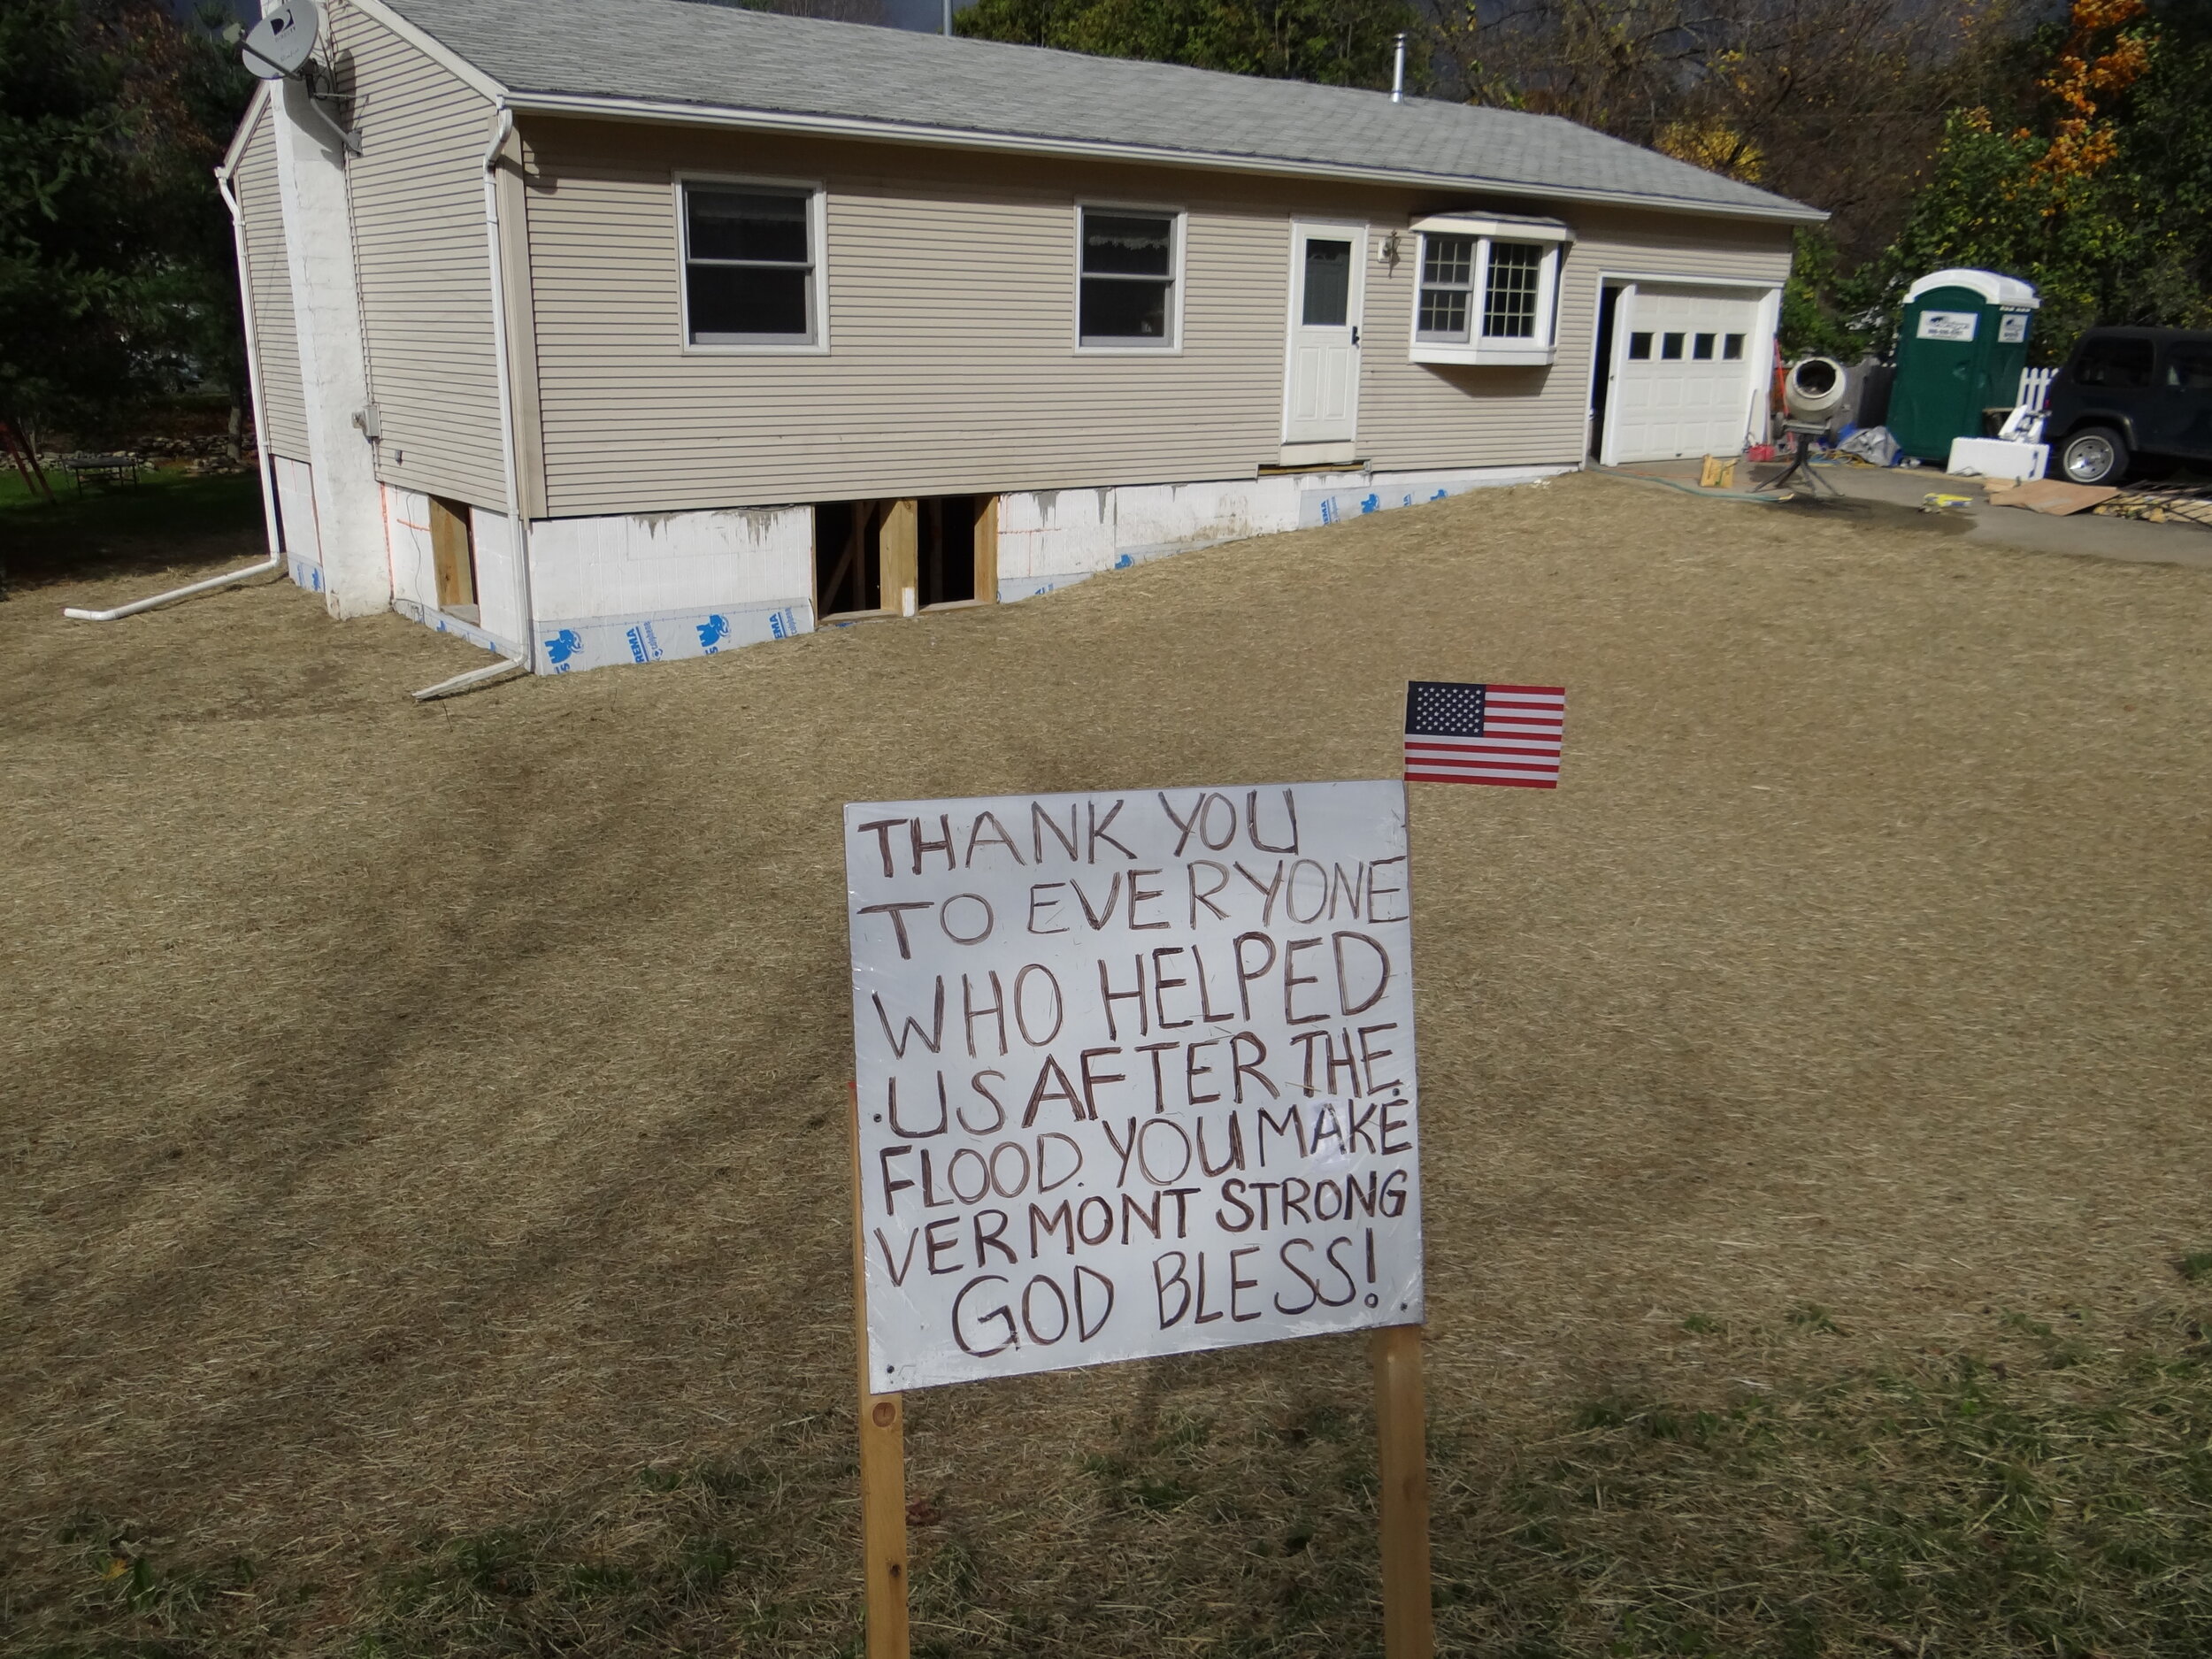  Duxbury homeowners share their message of thanks. Photo by Gordon Miller 